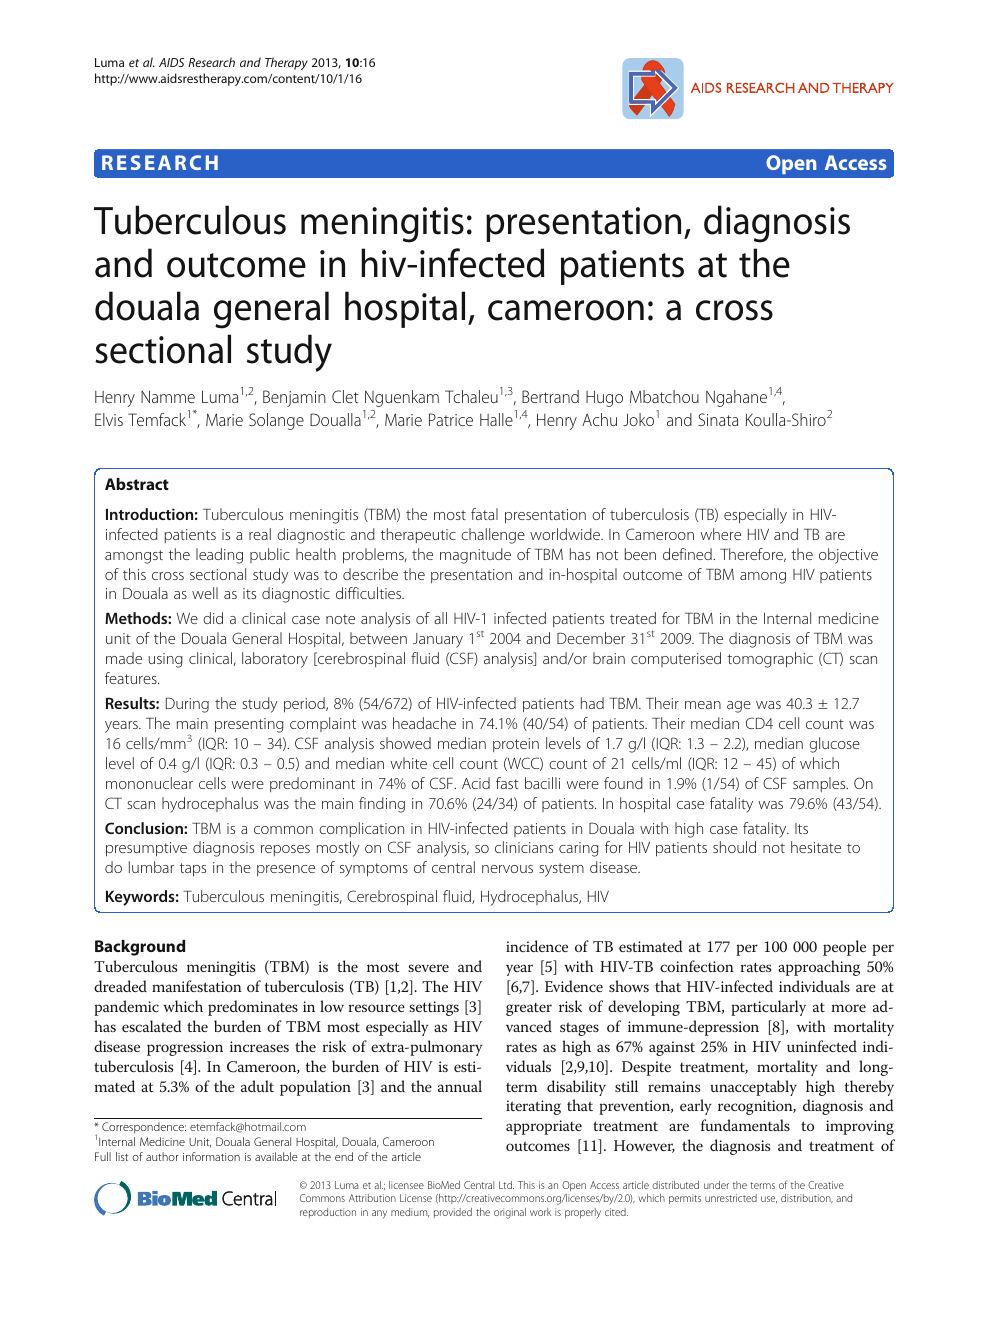 Tuberculous Meningitis Presentation Diagnosis And Outcome In Hiv Infected Patients At The Douala General Hospital Cameroon A Cross Sectional Study Topic Of Research Paper In Clinical Medicine Download Scholarly Article Pdf And